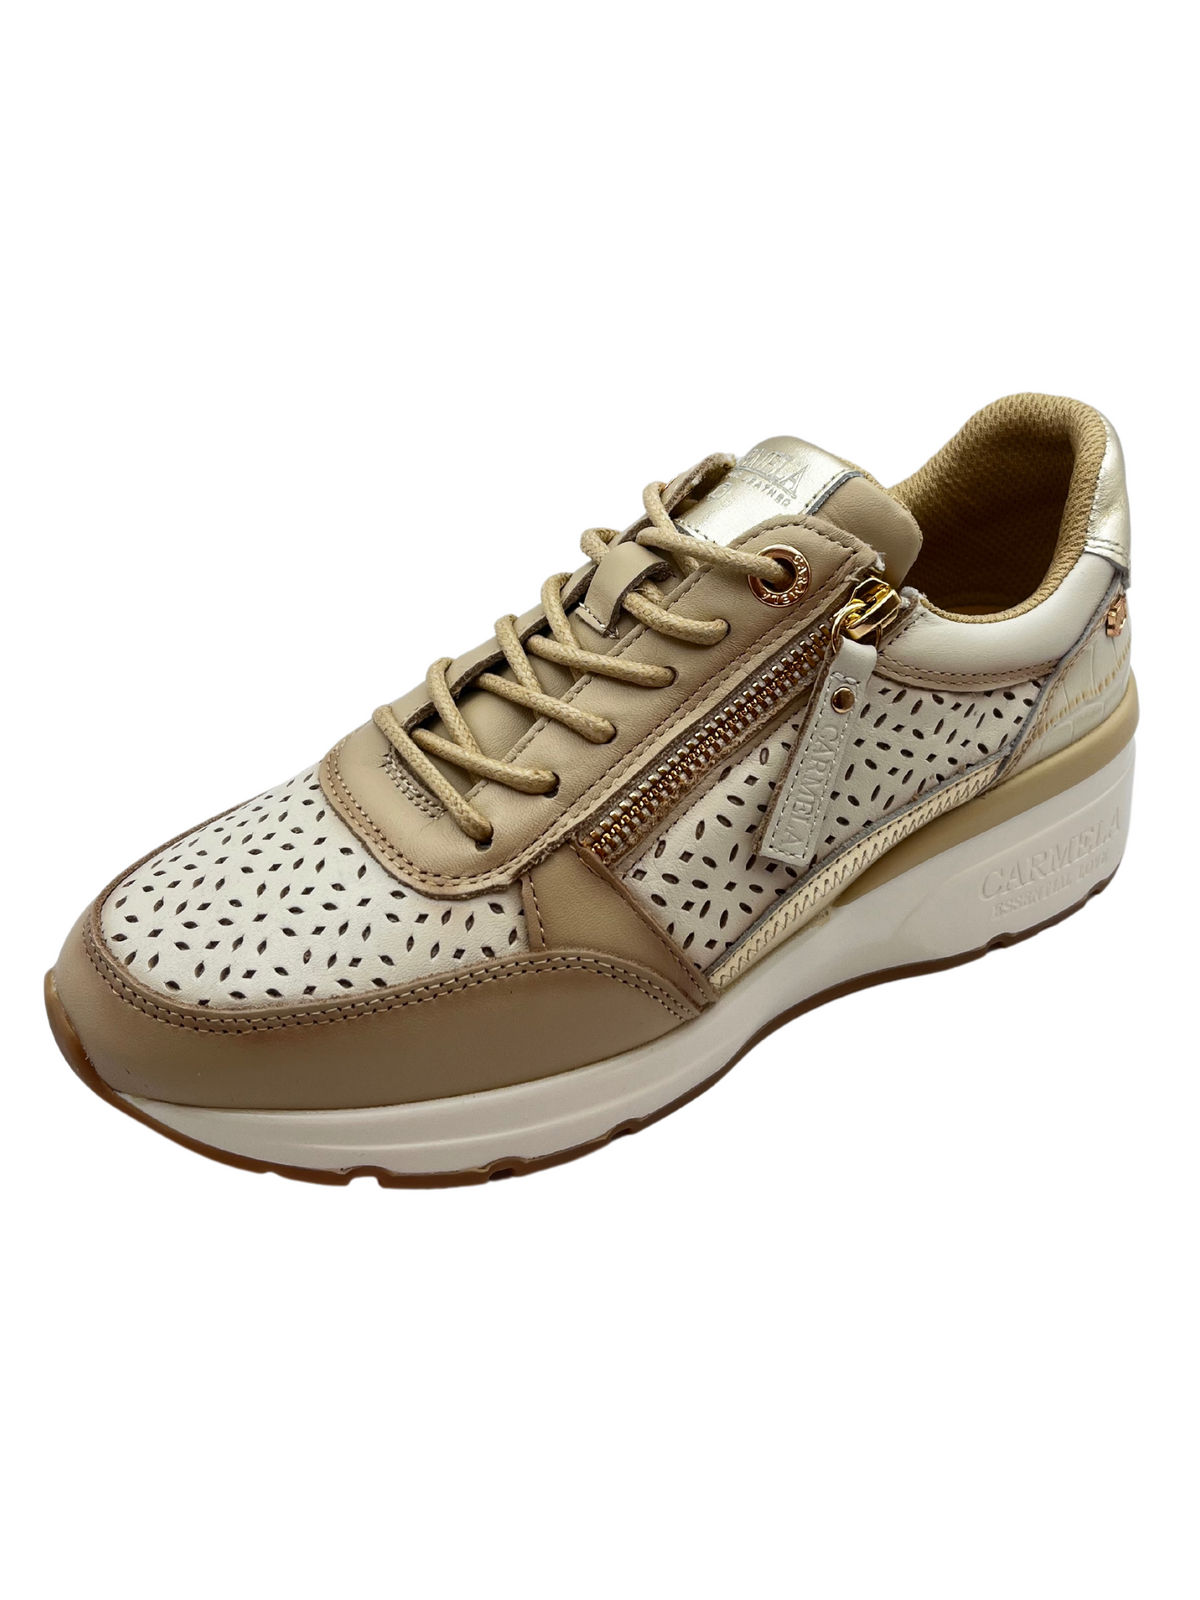 Carmela Beige and Gold Perforated Trainers With Side Zip